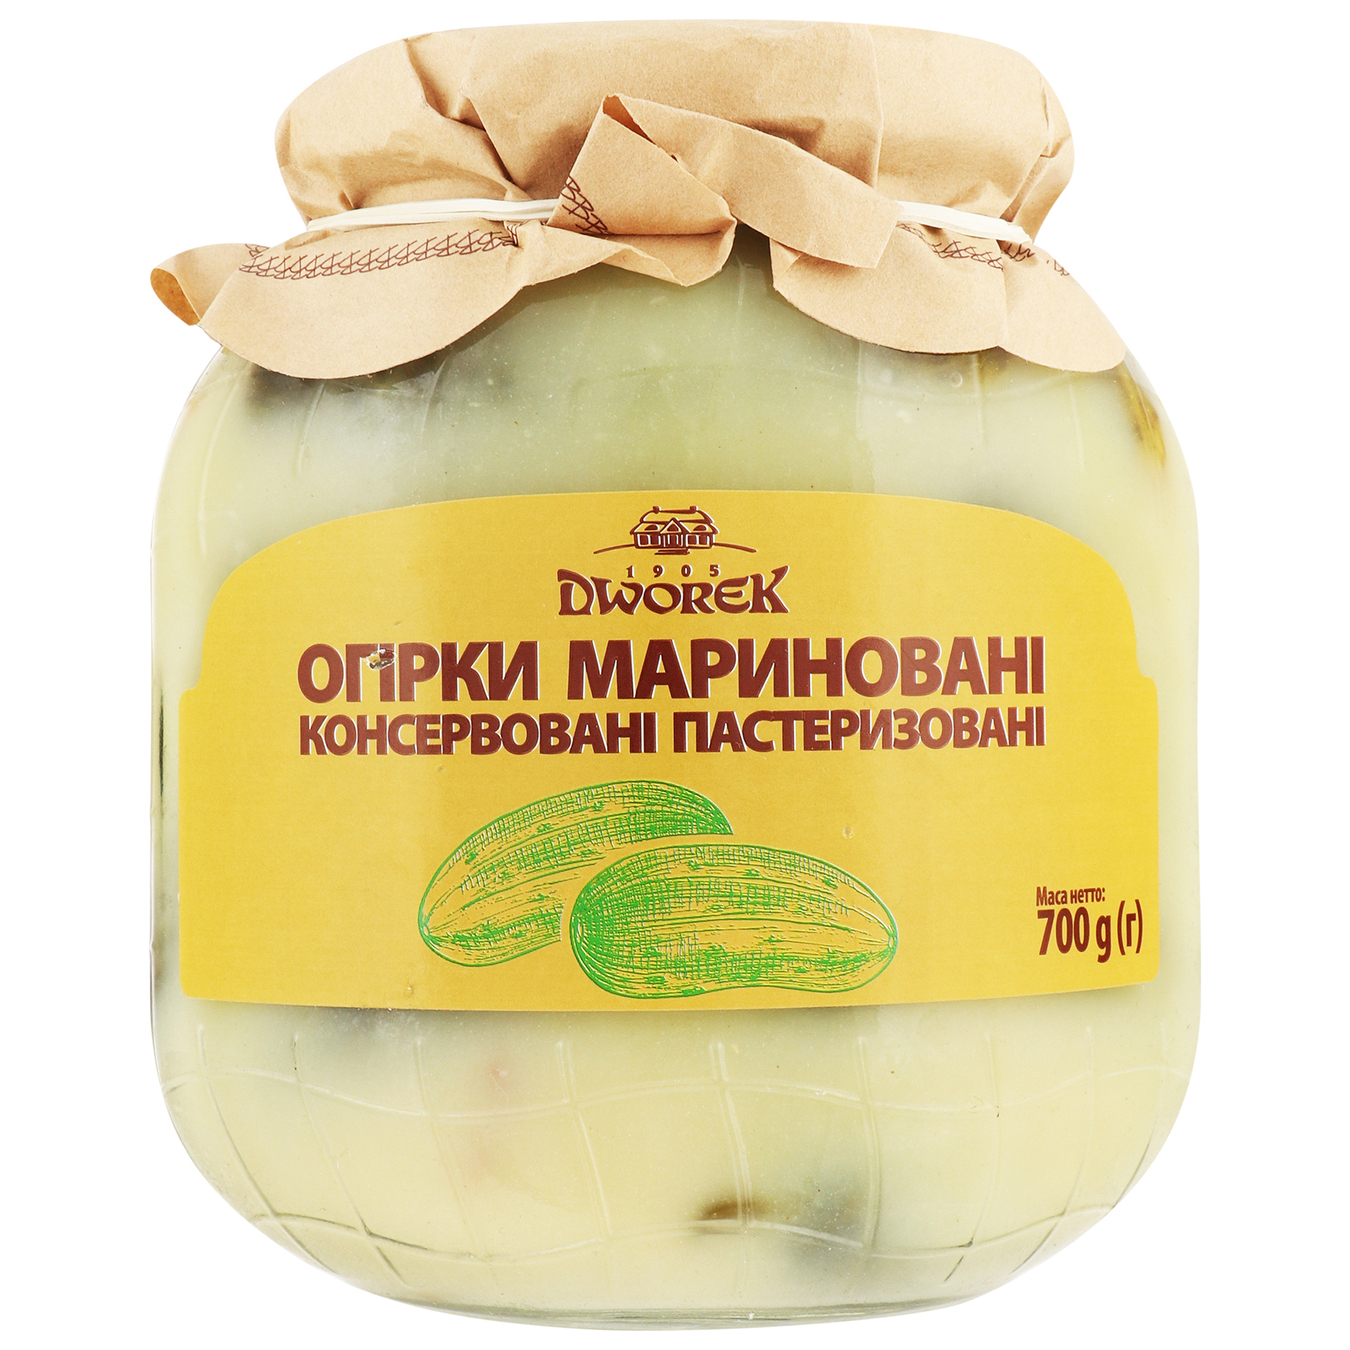 Dworek Pasteurized Marinated Canned Cucumbers 700g